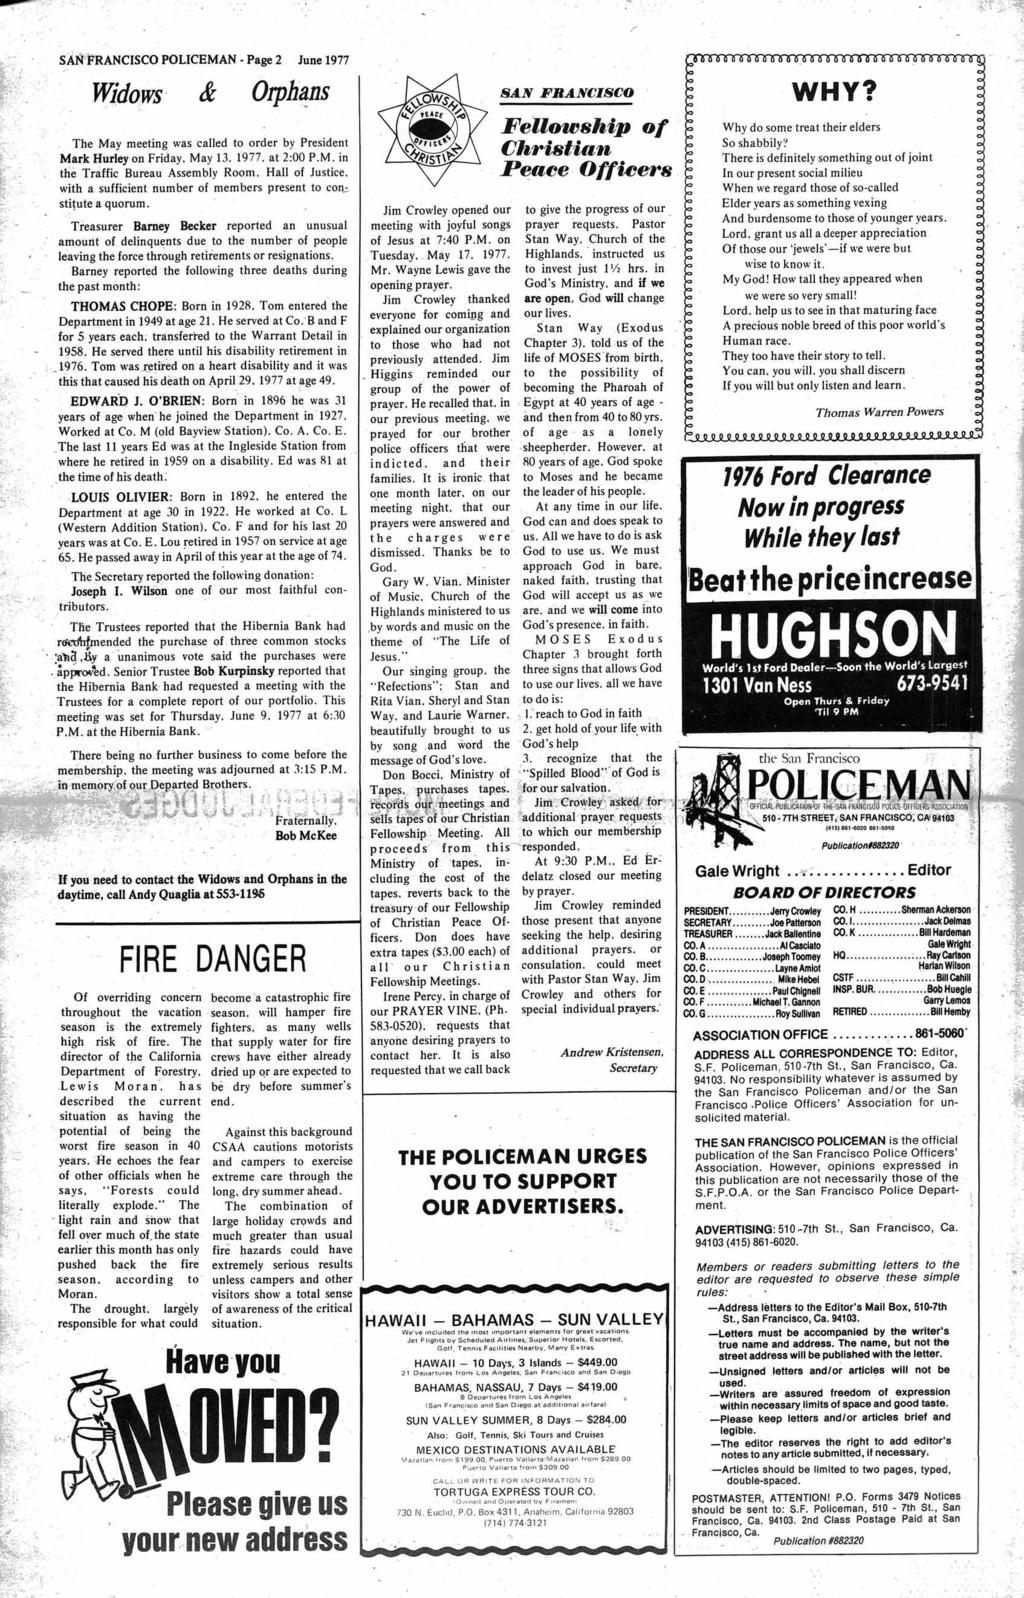 SAN FRANCSCO POLCEMAN - Page 2 June 1977-1 Widows & Orphans The May meeting was called to order by President Mark Hurley on Friday. May 13. 1977. at 2:00 P.M. in the Traffic Bureau Assembly Room.